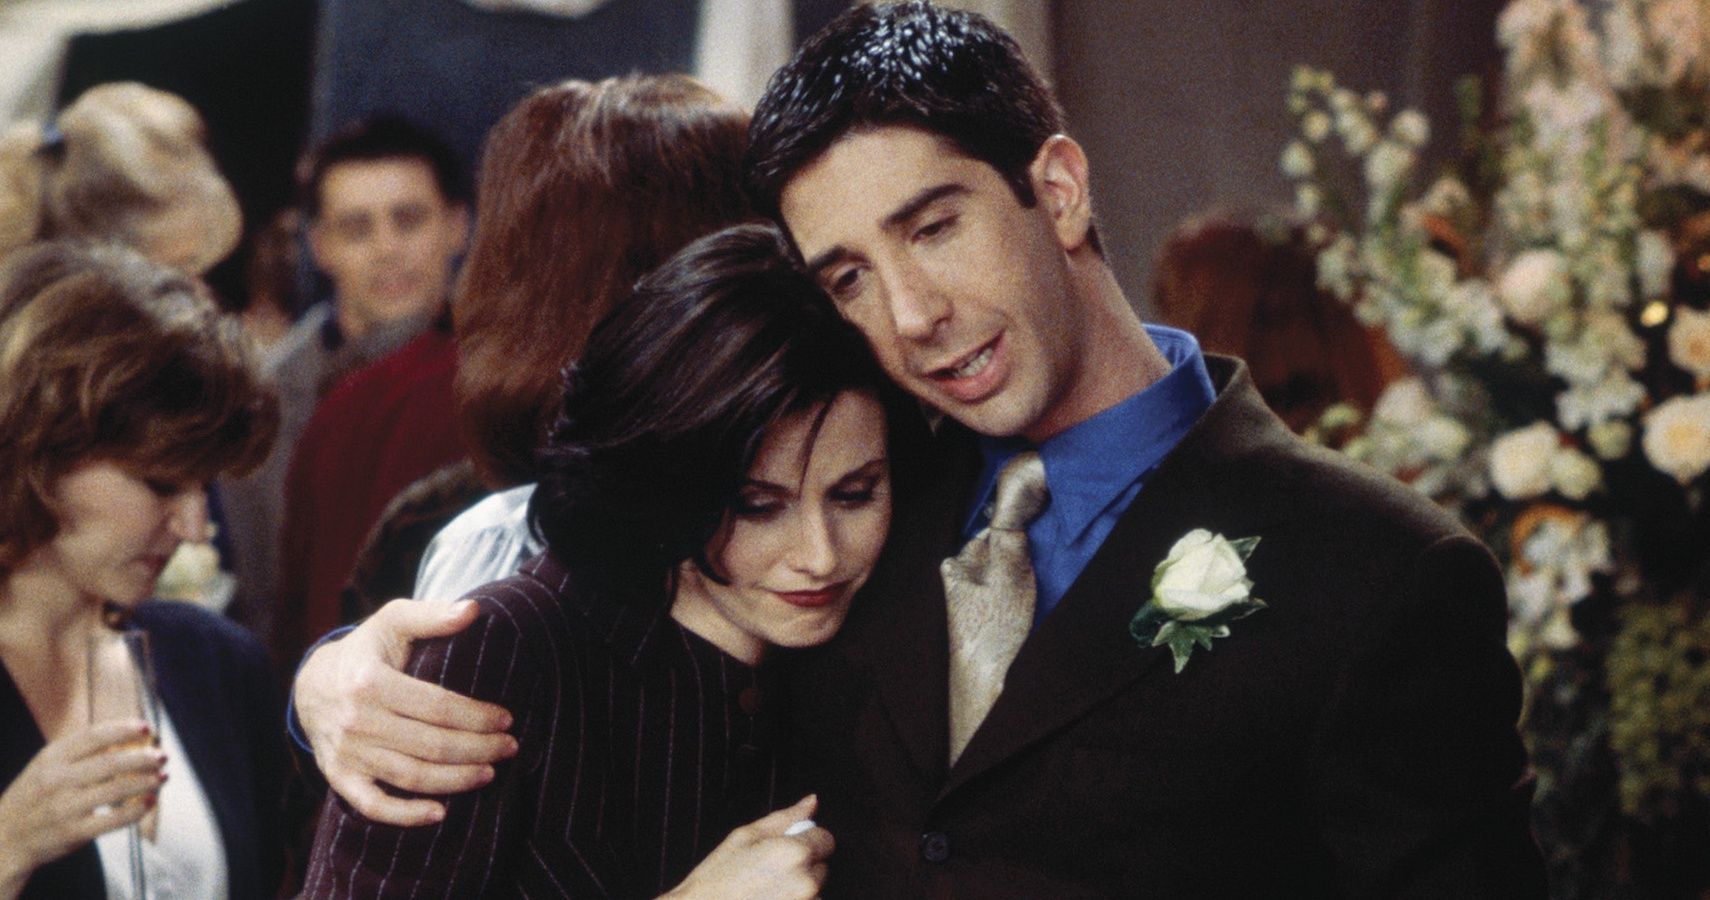 Friends: 5 Best Things Monica Did For Ross (& 5 He Did For Her)